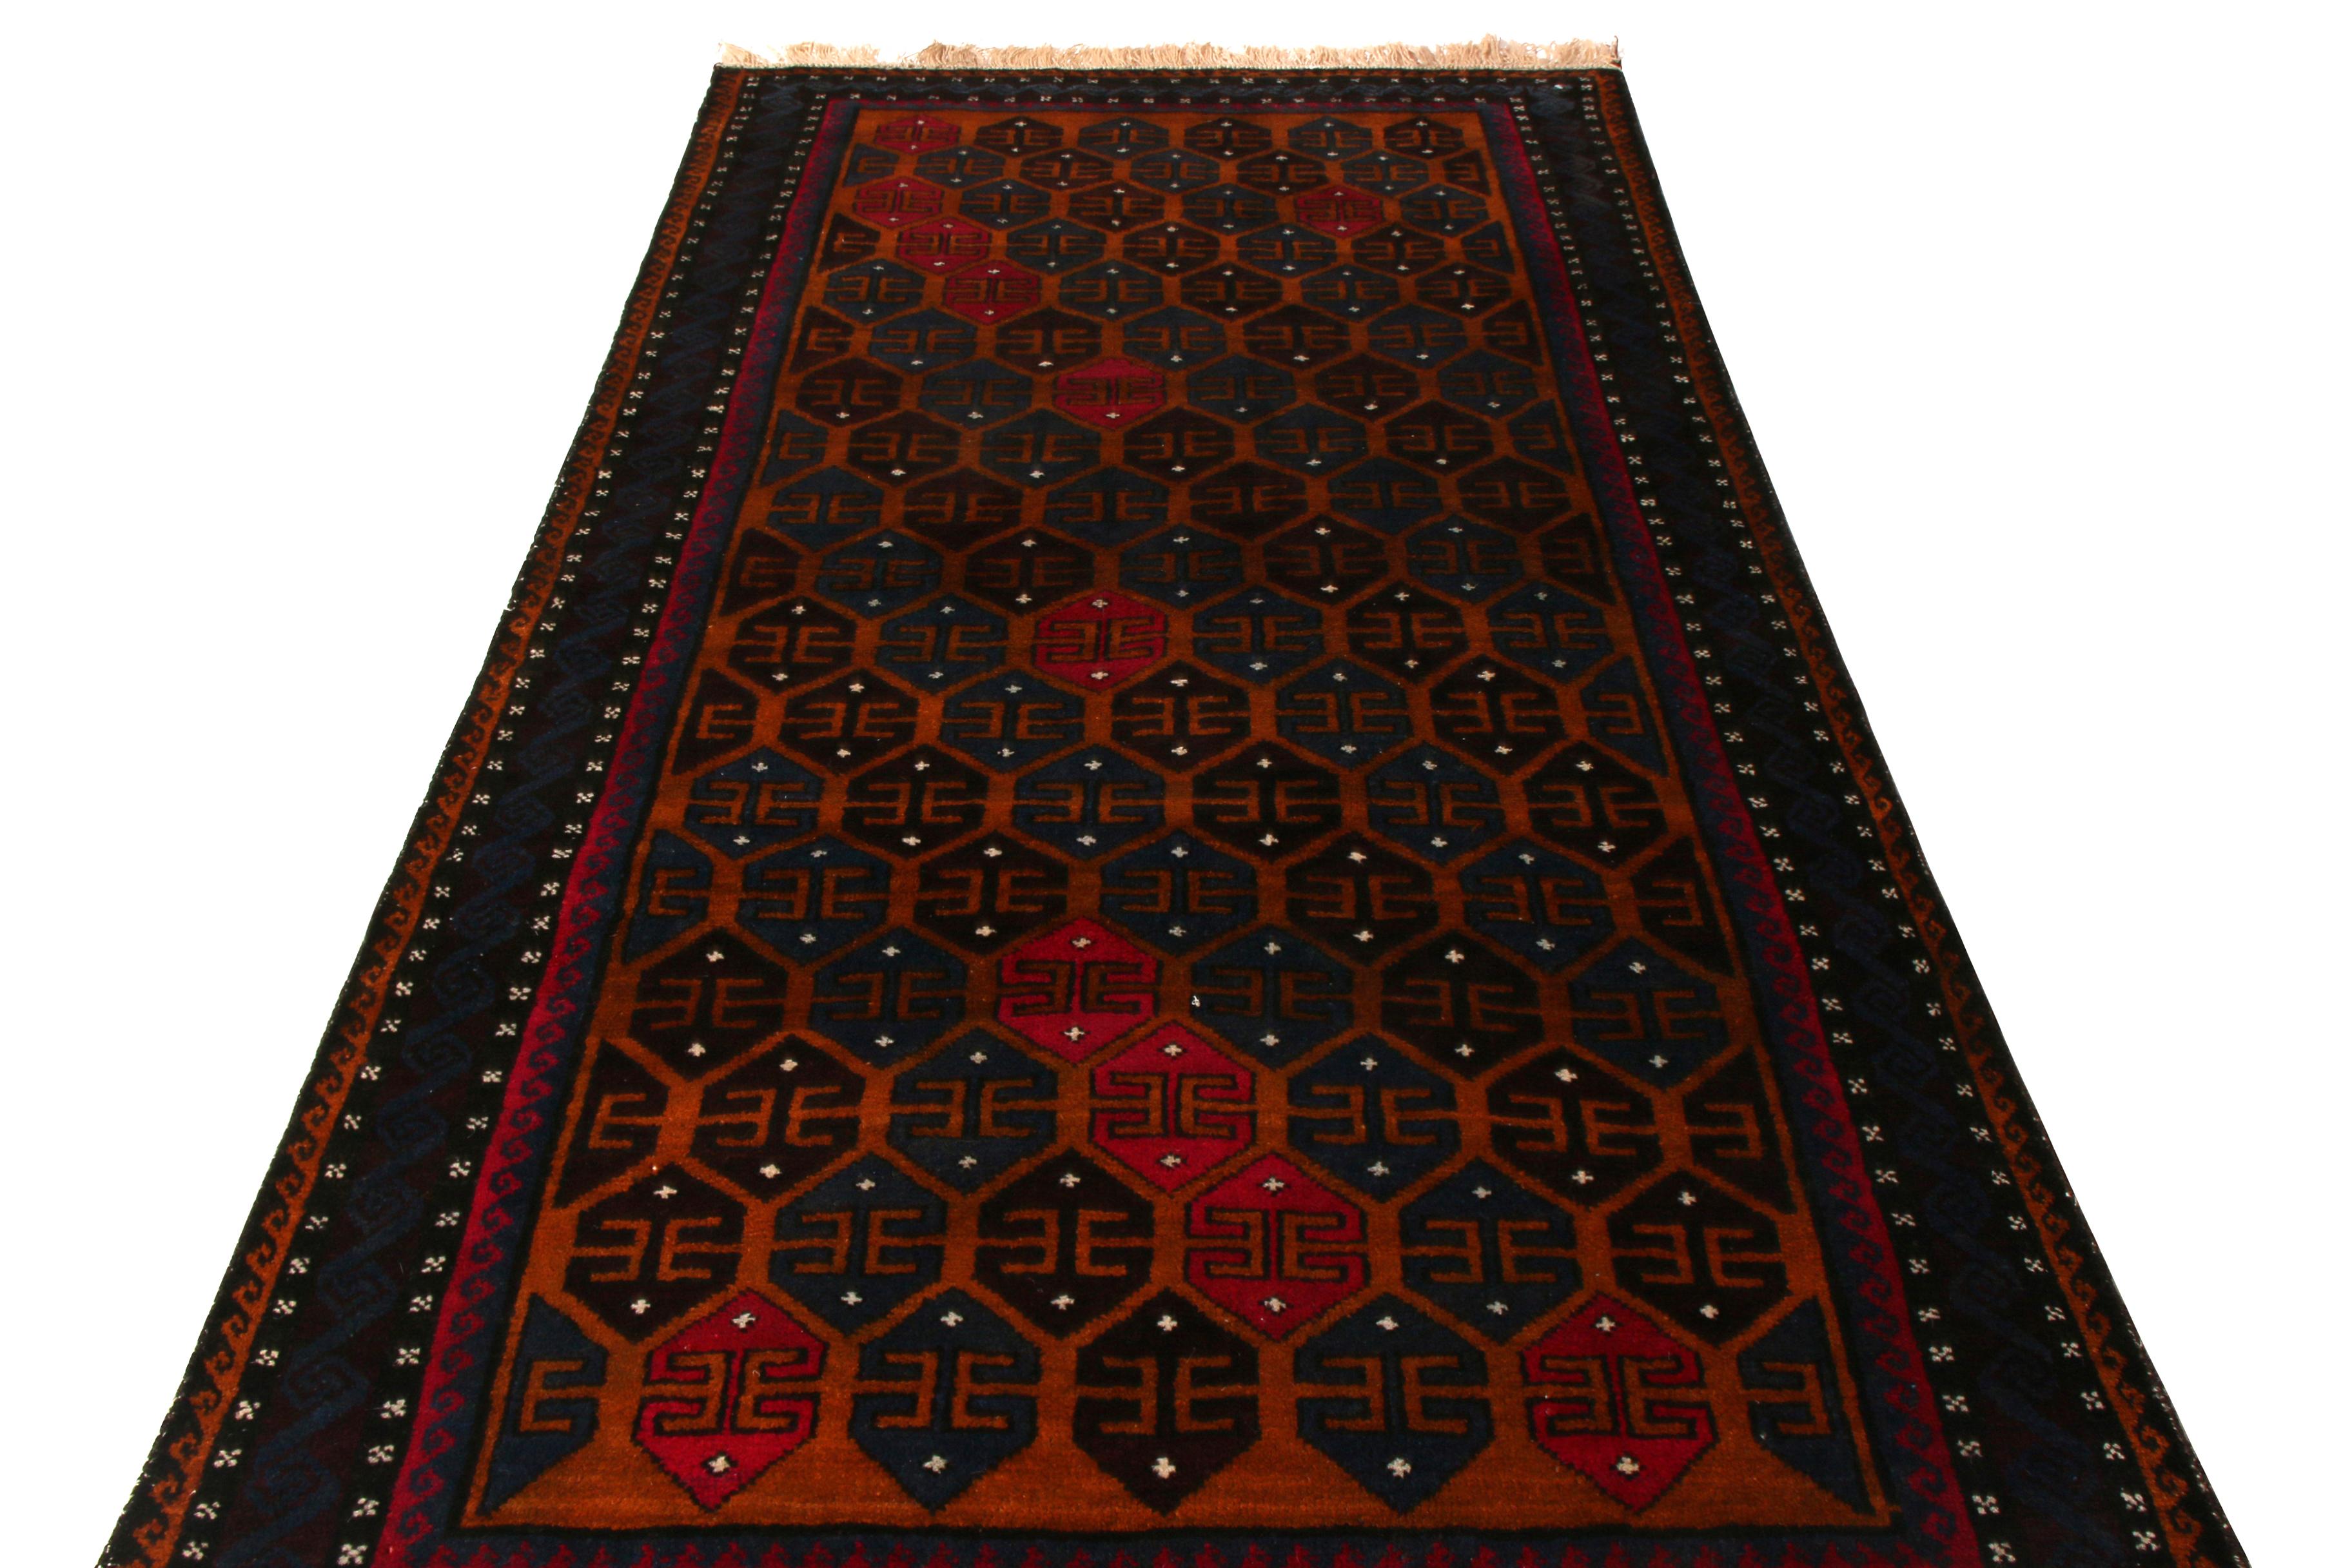 Hand knotted in wool originating circa 1950-1960, this vintage midcentury Persian rug hails from the Baluch tribal weavers of renown, enjoying a play of versatile size and a unique navy blue emphasis in the play of rich brown and red colorway, a